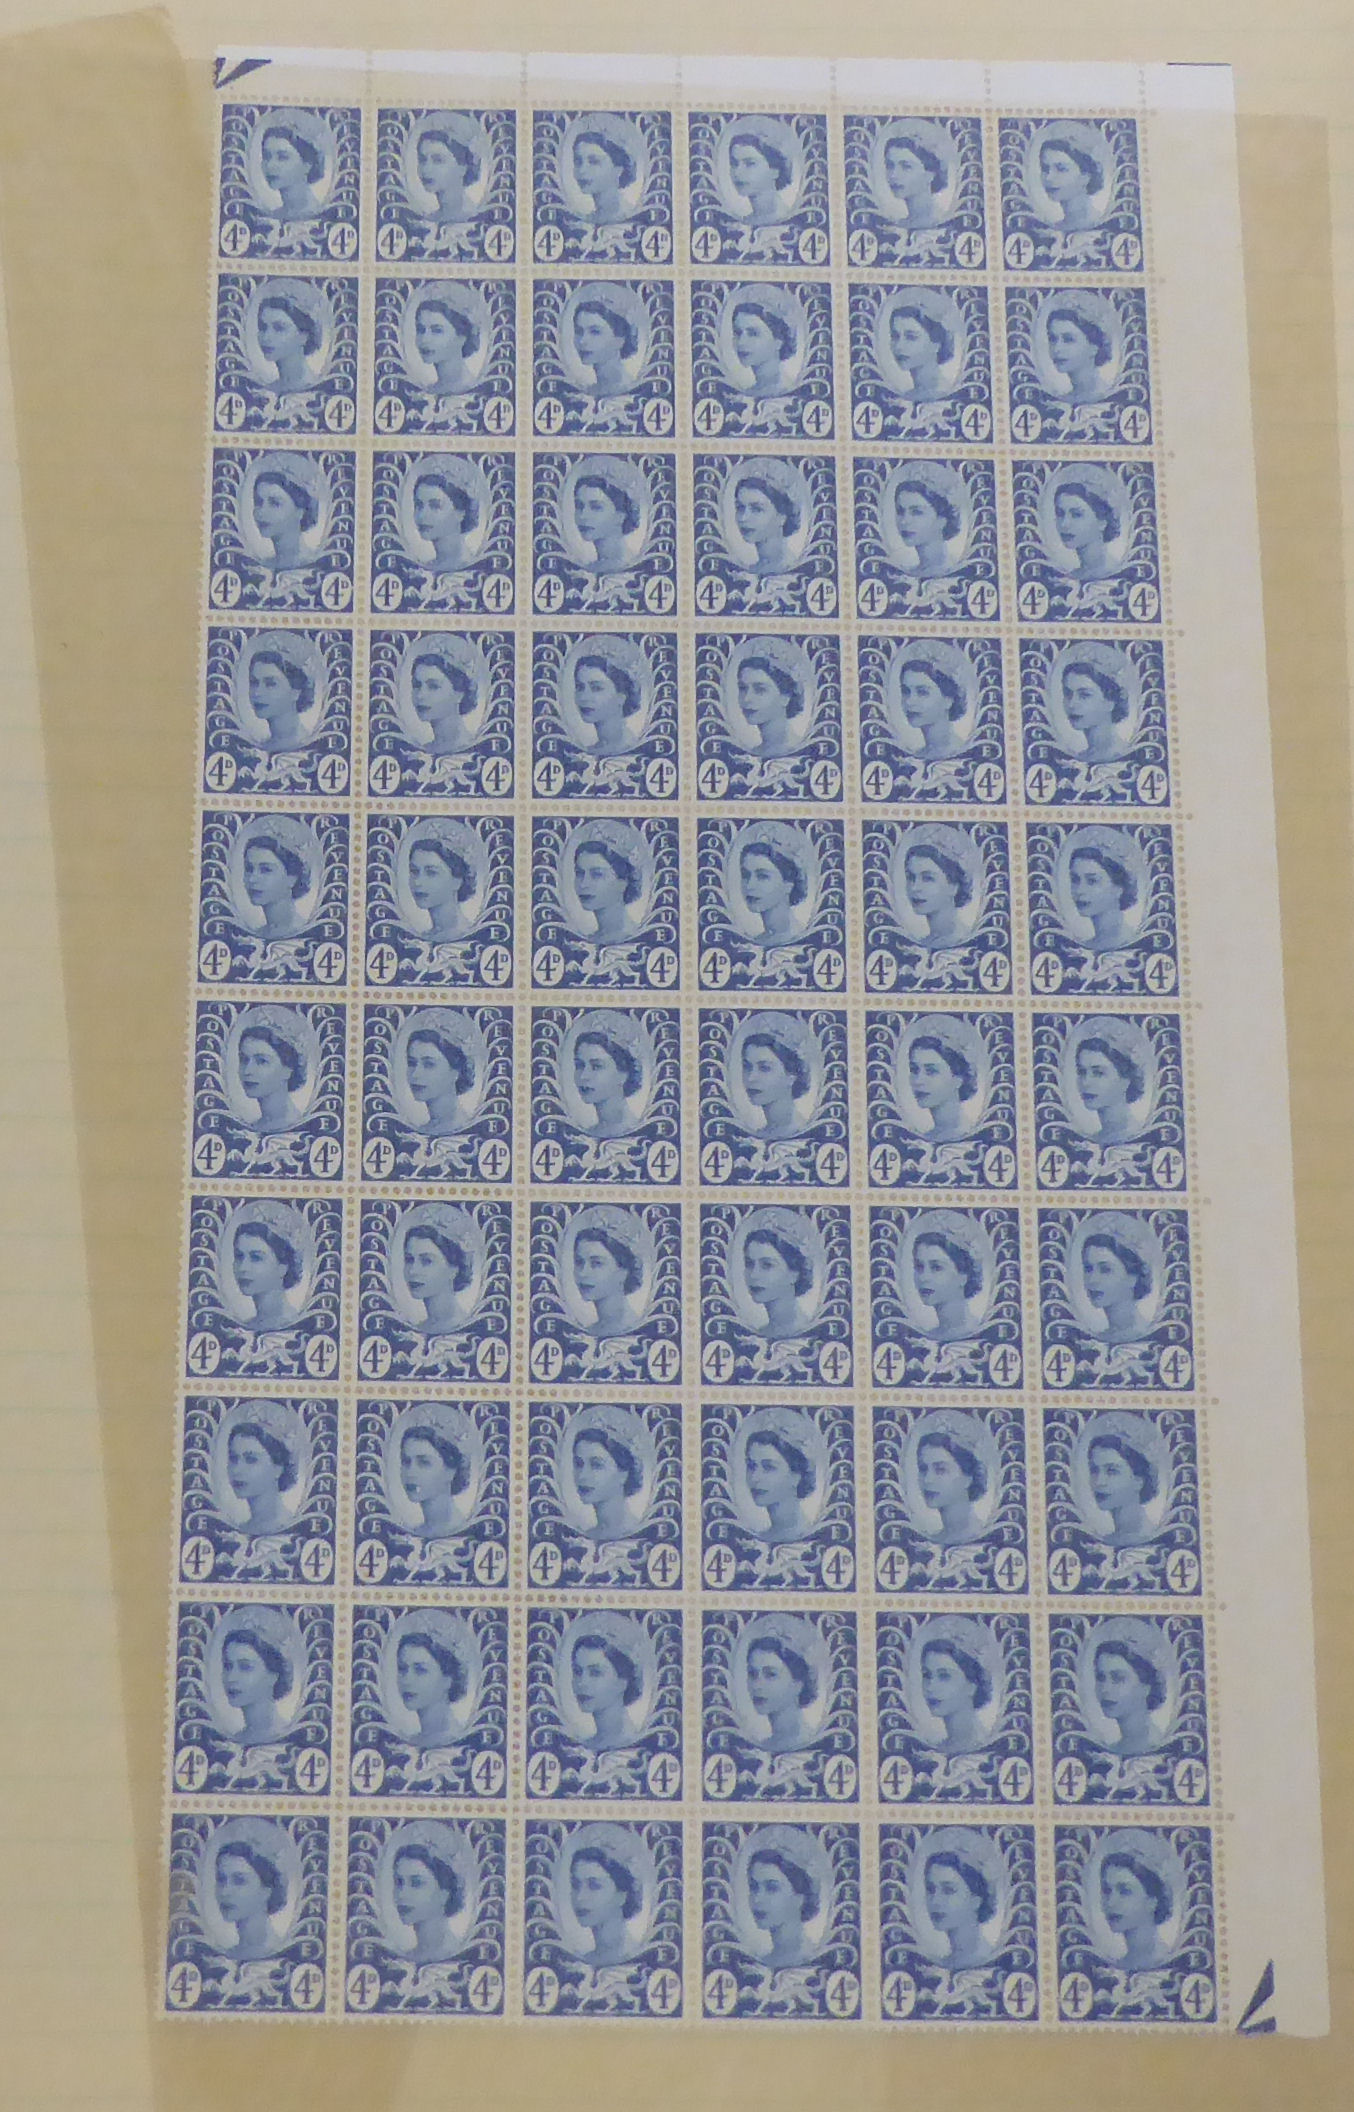 Uncollated postage stamps, British sheets and blocks - Image 5 of 10